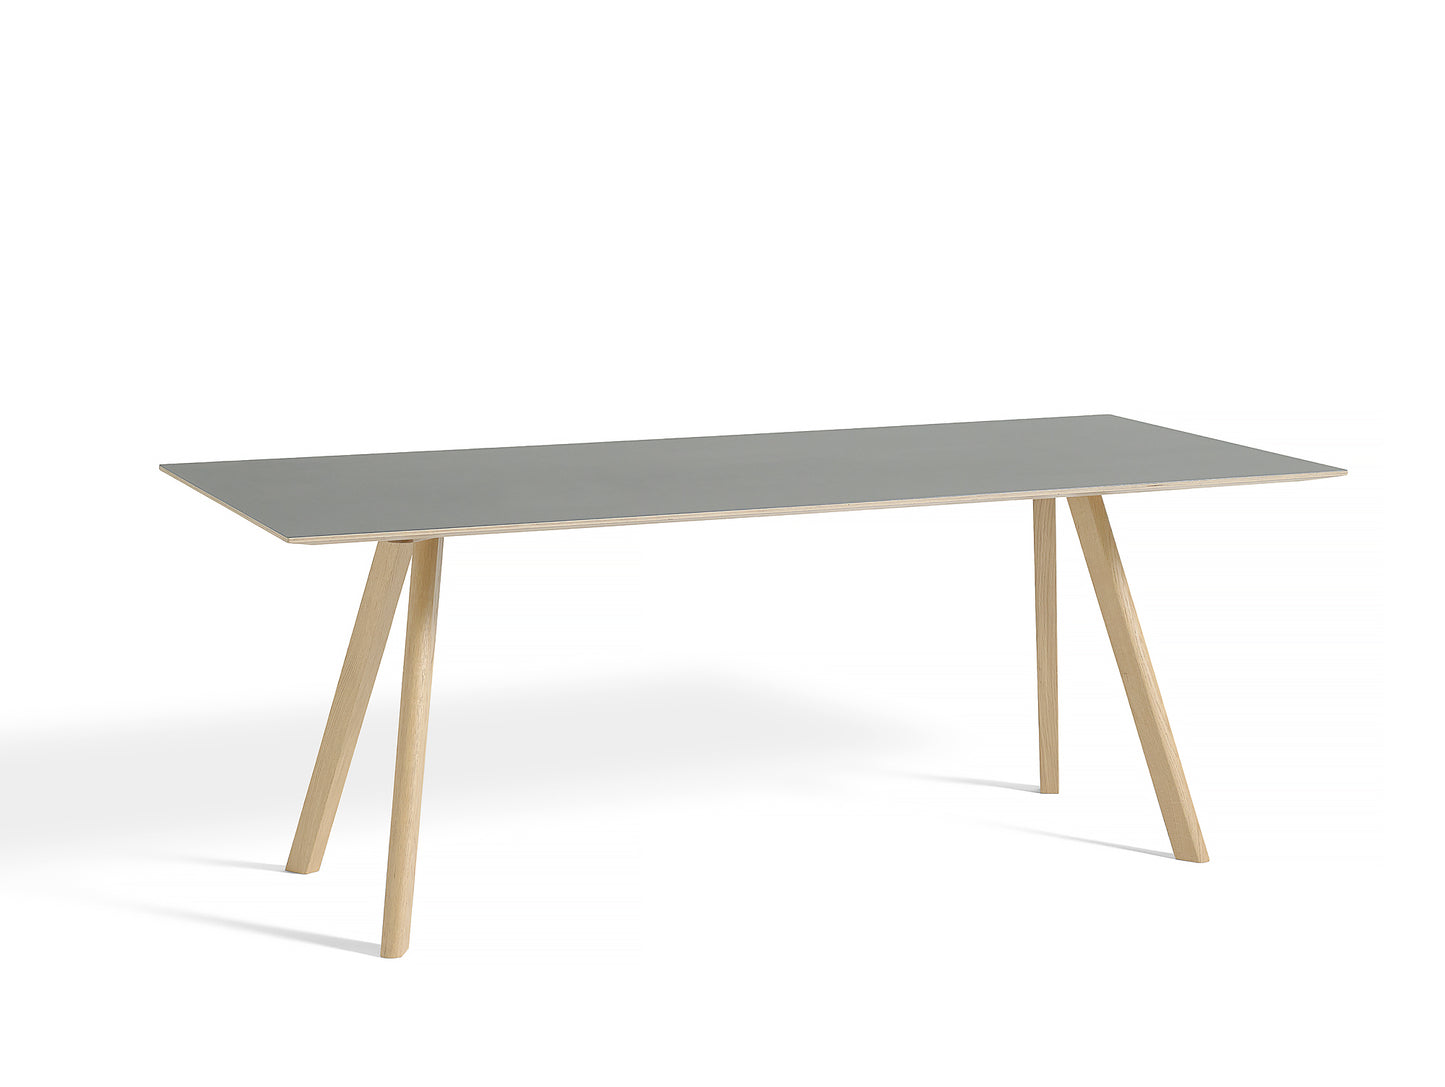 Copenhague Dining Table CPH30 by HAY / 90 x 200 cm / Grey Linoleum top / Oak base (water based lacquer).